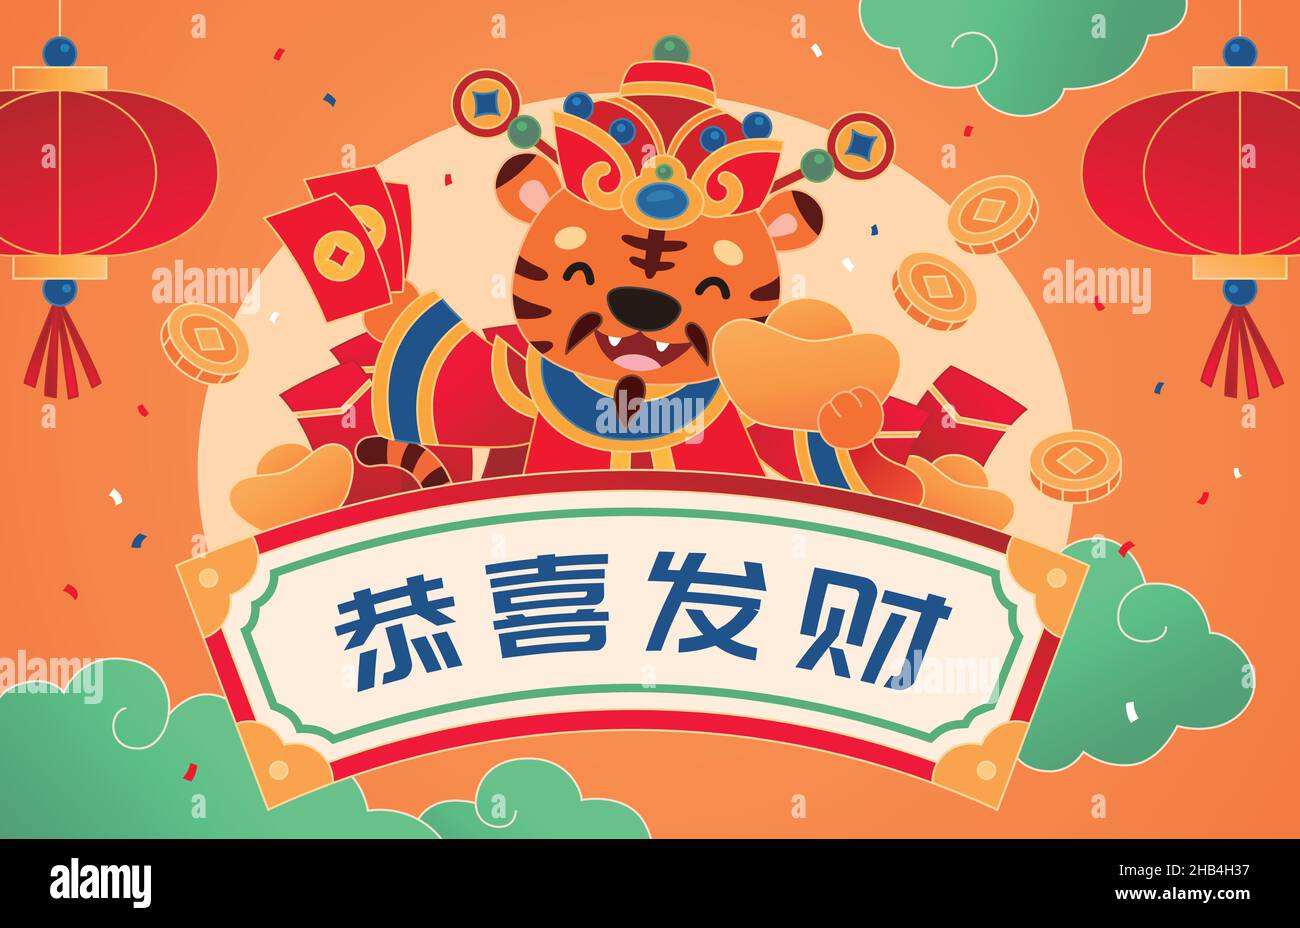 Cute Tiger in traditional Chinese costume holding gold ingot and red envelopes with greeting scroll. Flat style illustration. Translation: May you be Stock Vector